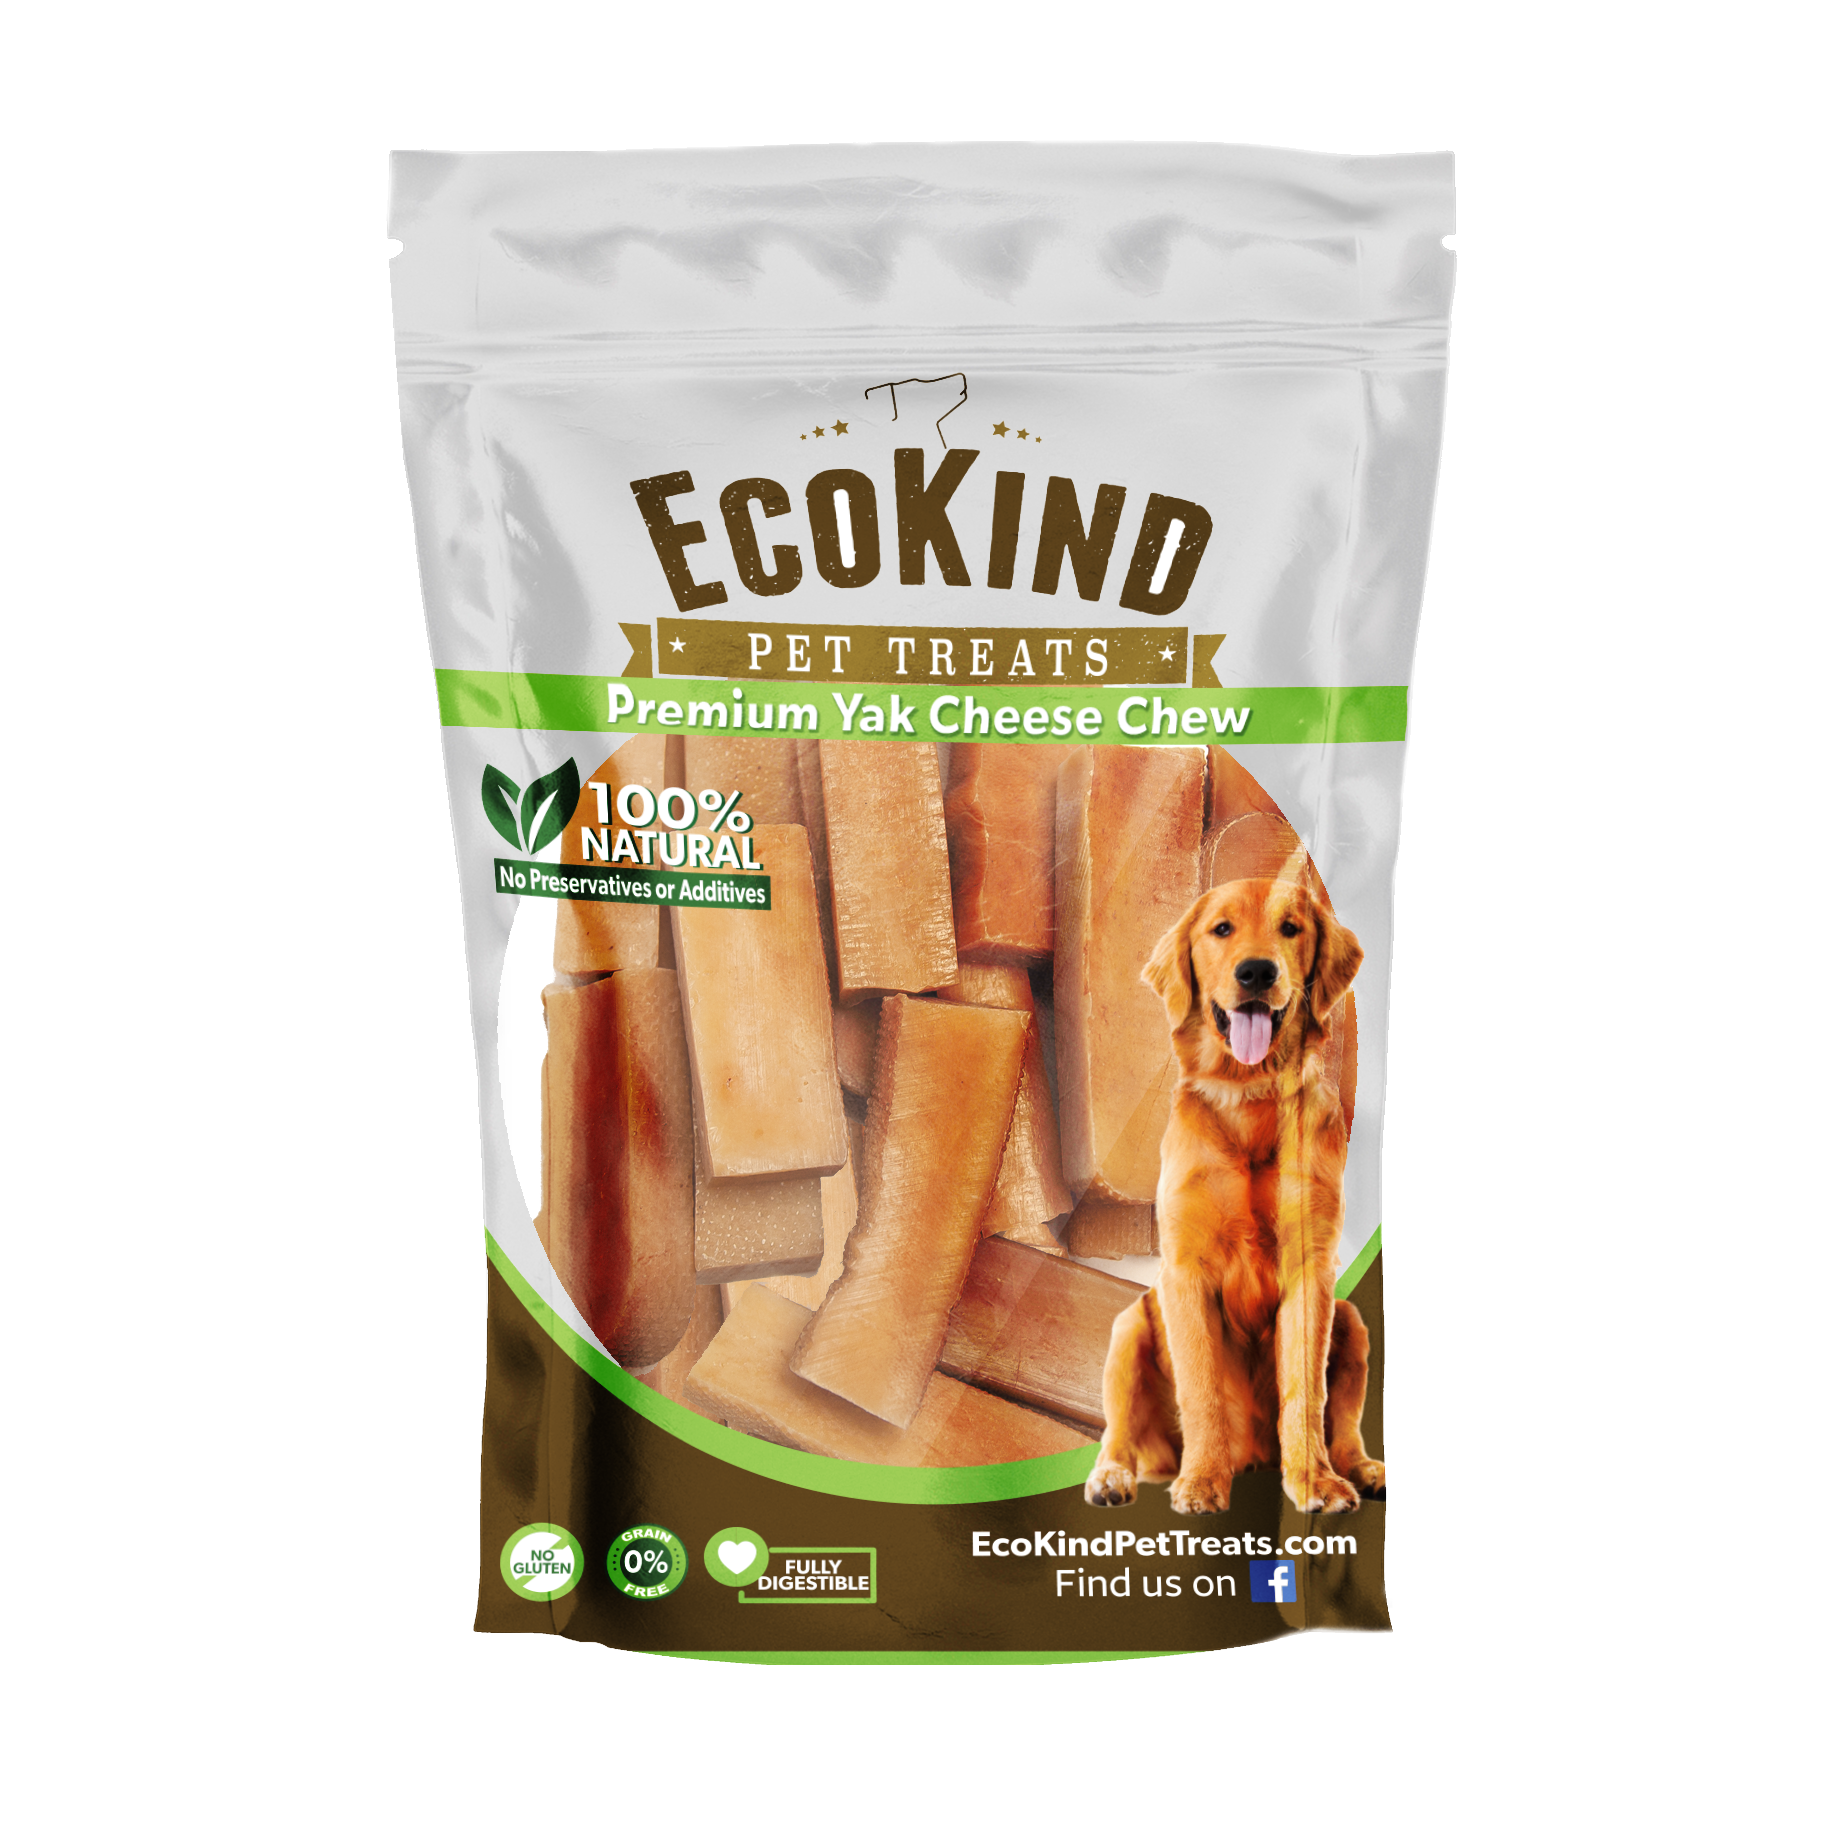 A bag of Small EcoKind Himalayan Yak Chew Treats - 100% Natural, Gluten free & Long Lasting Dog Chews for small dogs and puppies